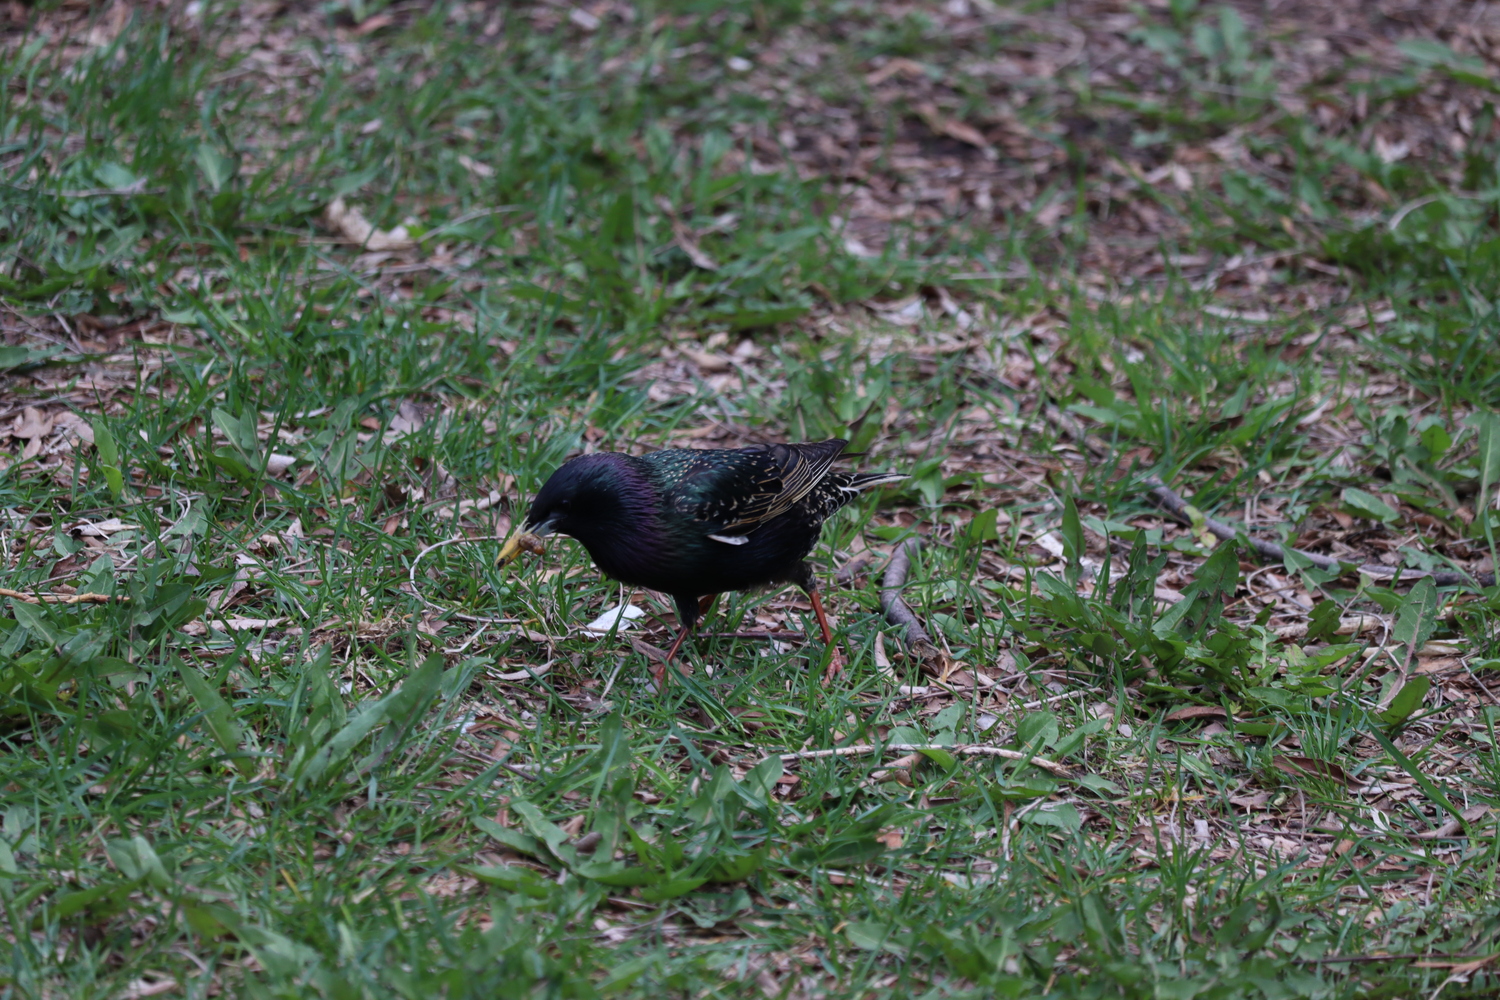 some kind of black bird
in the grass
holding a grub of some kind
in its beak.
it has purple and green
in its feathers similar to a pigeon,
with some white streaks on its wings.